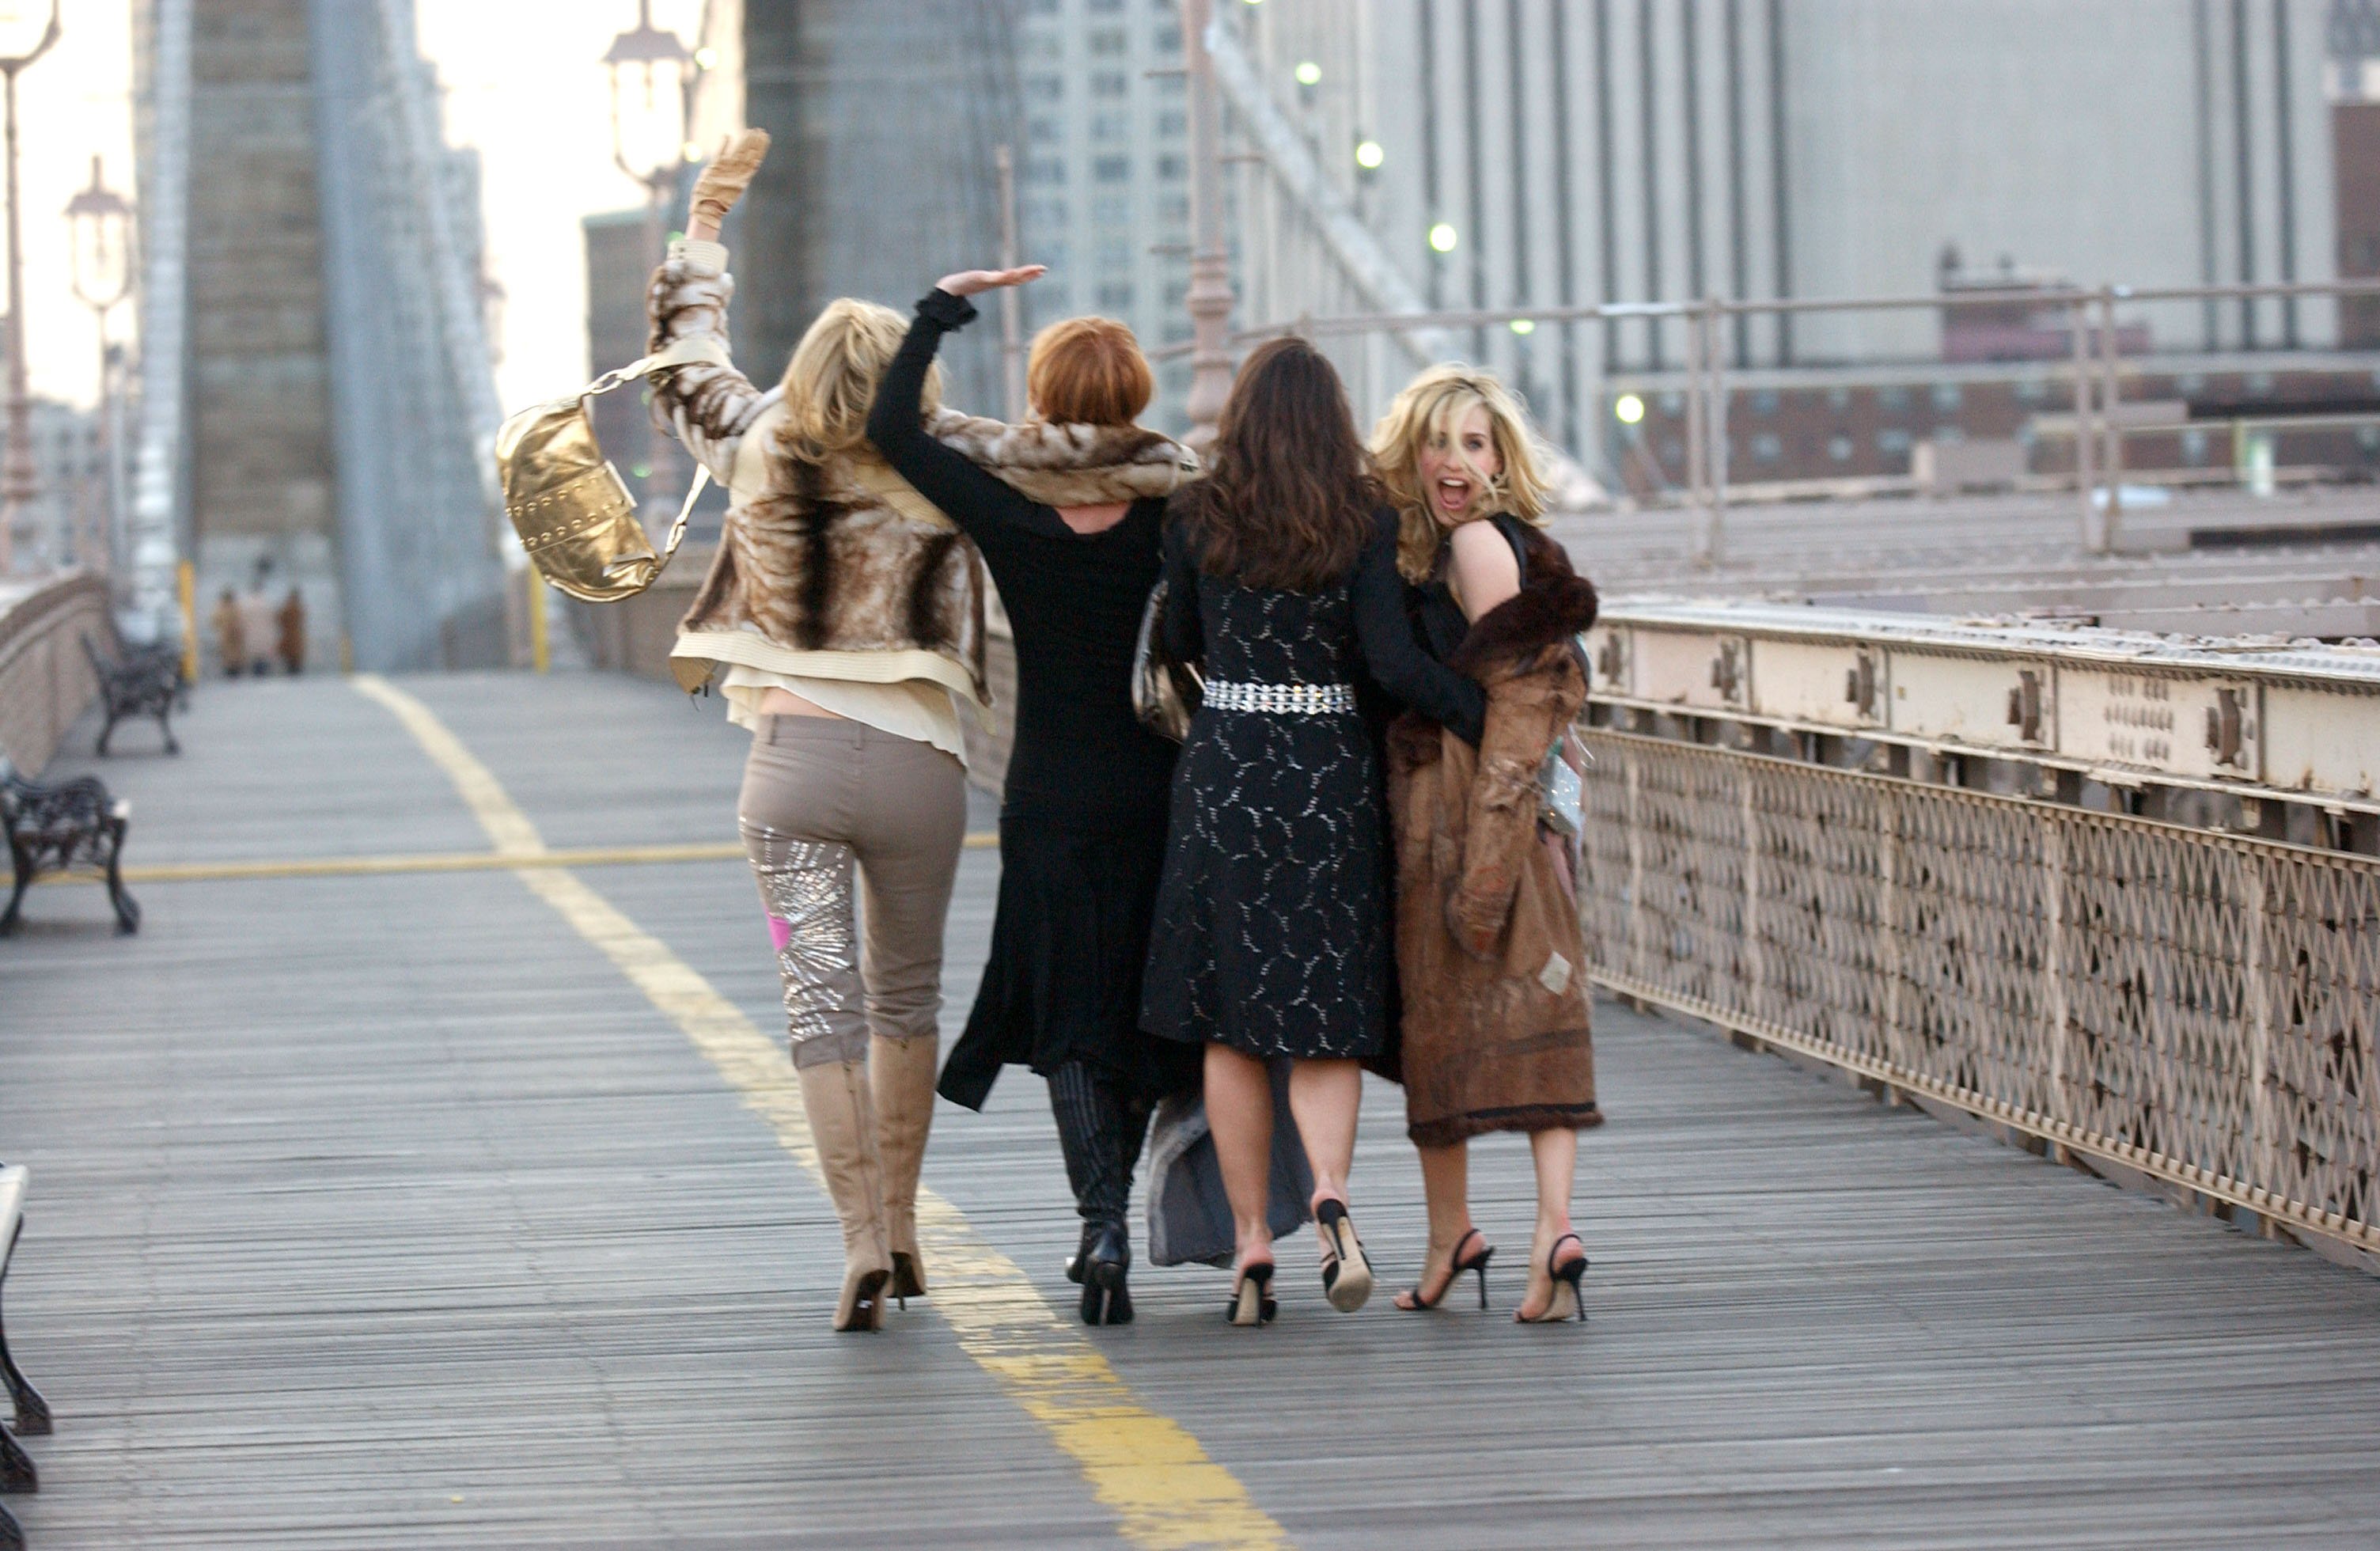 Kim Cattrall, Cynthia Nixon, Kristin Davis and Sarah Jessica Parker are photographed from behind walking across the Brooklyn Bridge during a promotional shoot for 'Sex and the City: The Movie' the show's reboot, 'And Just Like That...' will preimere on HBO Max on Dec. 9, 2021